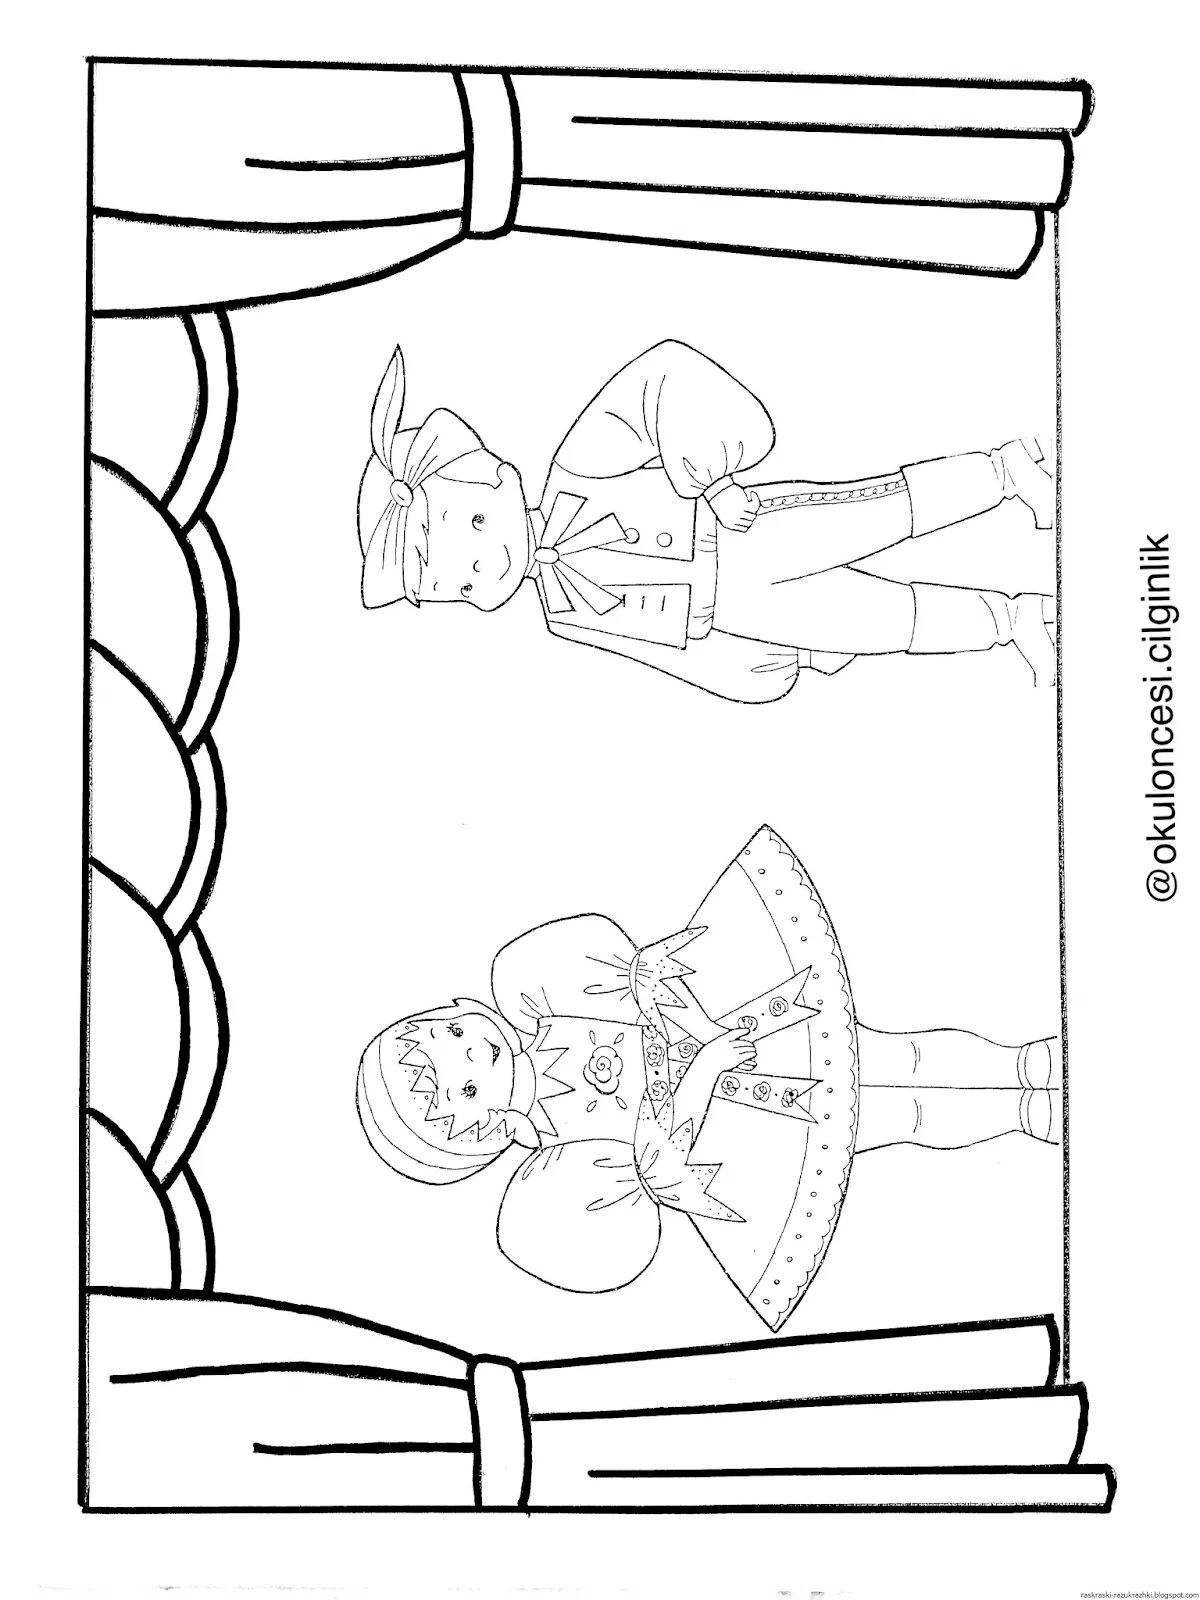 Coloring page charming theater performer